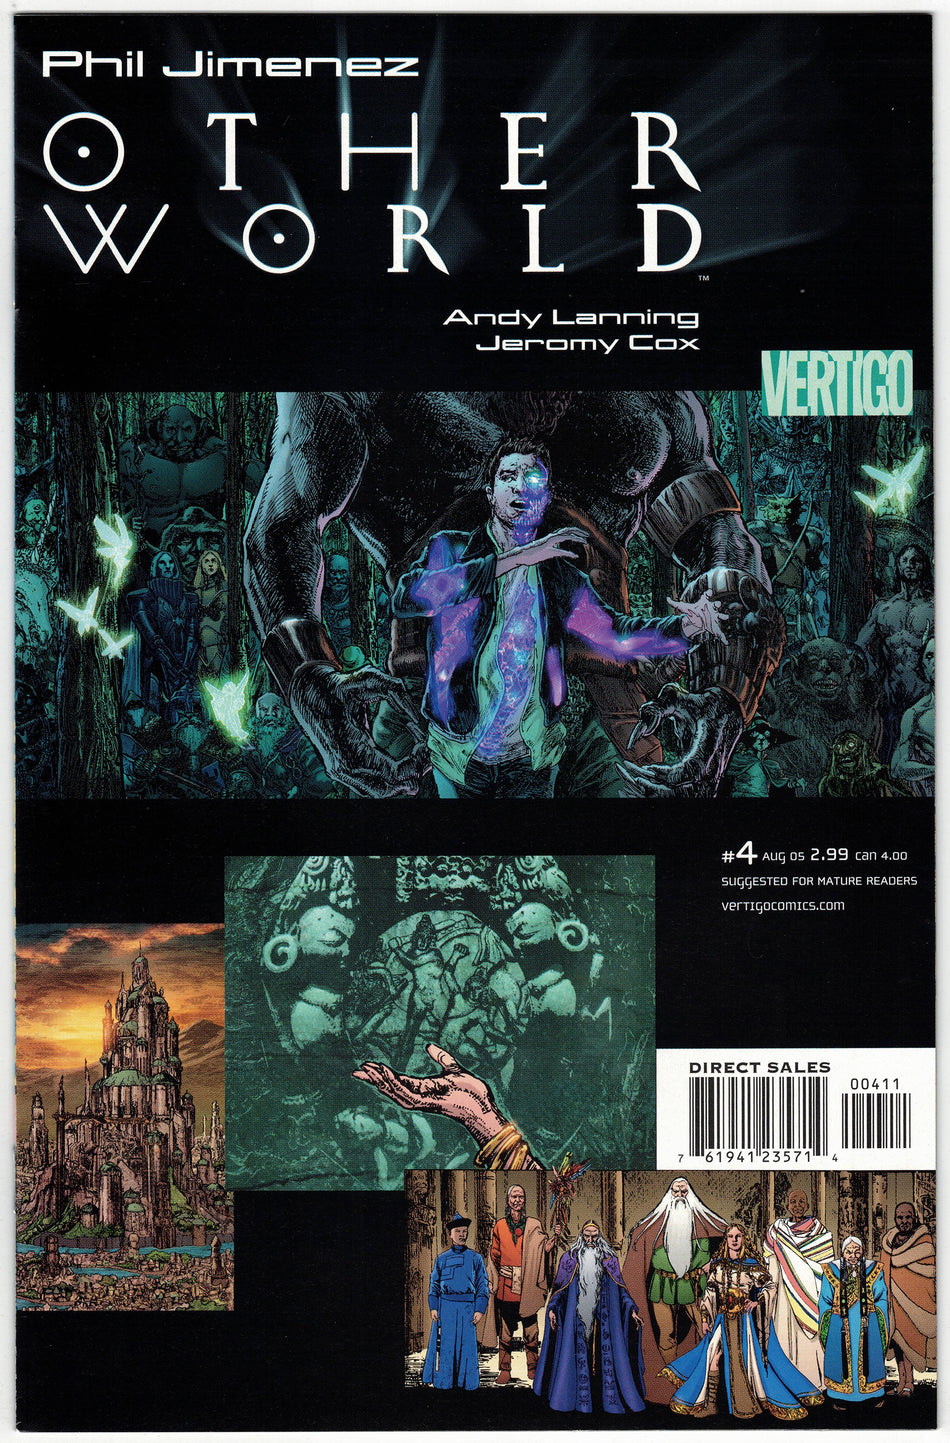 Photo of Otherworld (2005) Issue 4 Comic sold by Stronghold Collectibles